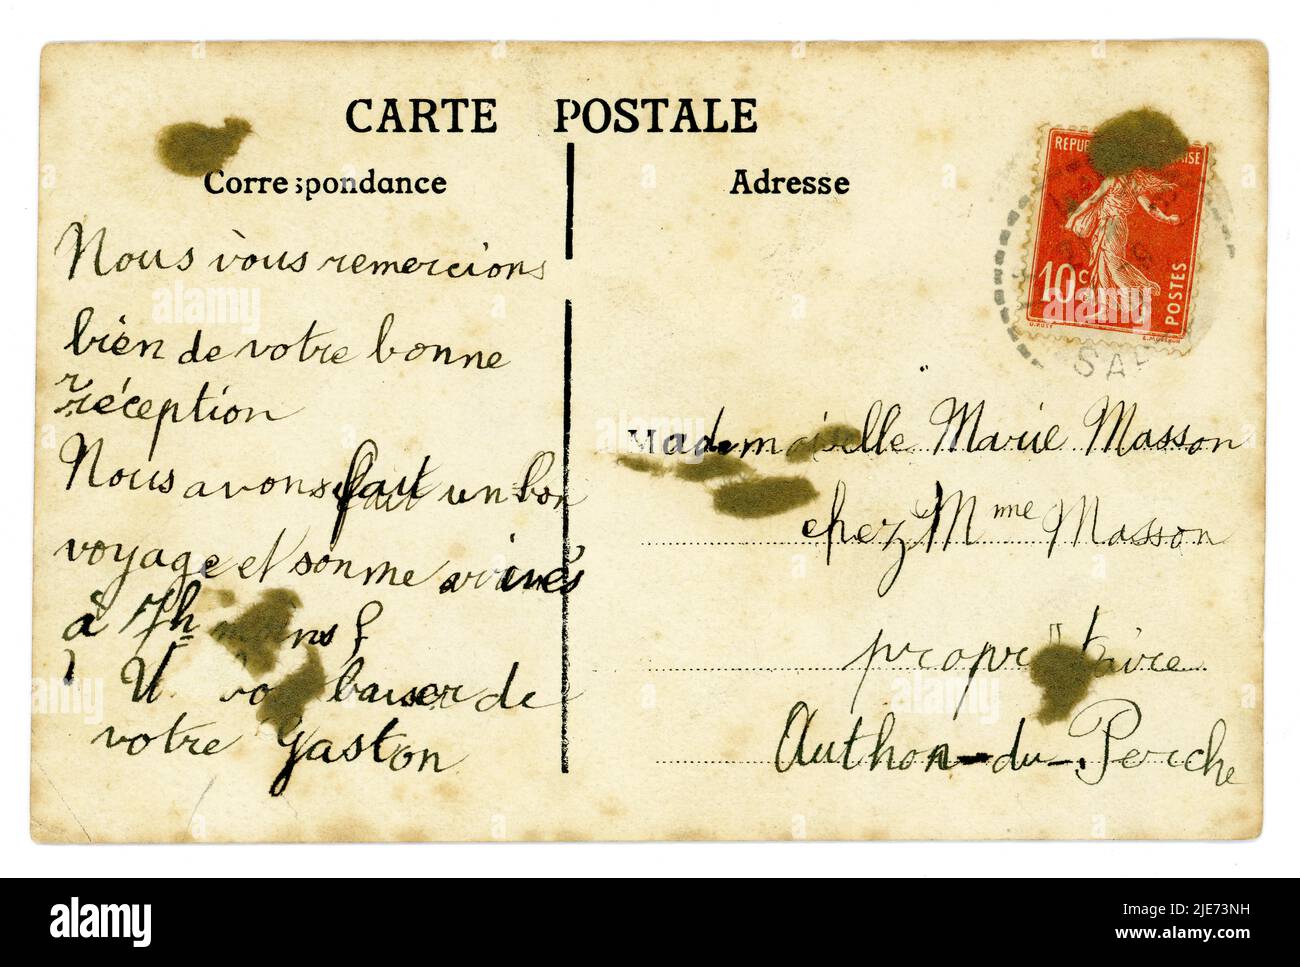 Reverse of original early 1900's French postcard sent to address in Authon-du-Perche in Eure-et-Loire, Red 10c Republic France 'sower' type stamp, posted in 1910. Stock Photo